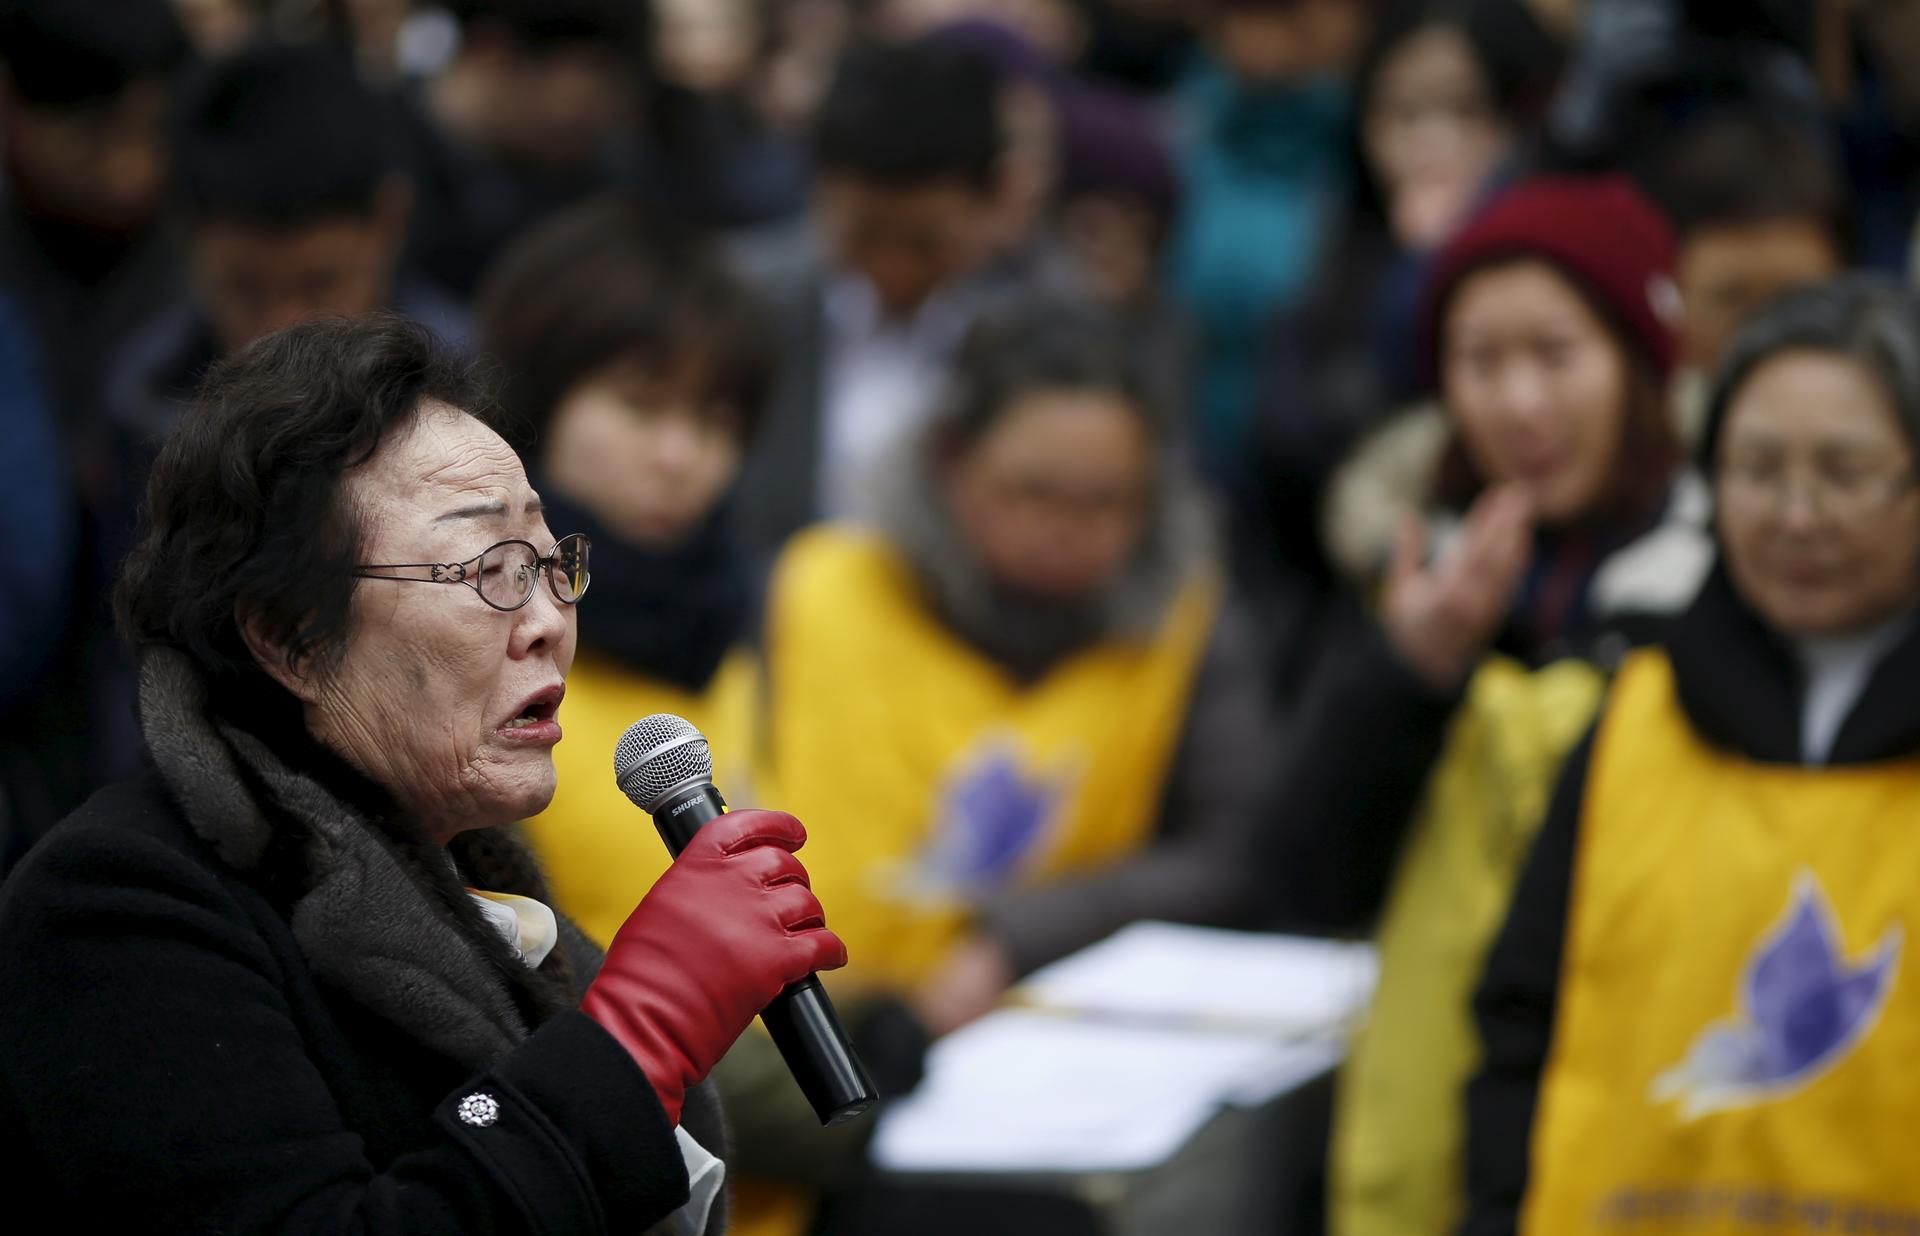 Former South Korean "comfort woman" Lee Yong-soo speaks during an anti-Japan rally in front of Japanese embassy in Seoul, South Korea, December 30, 2015.